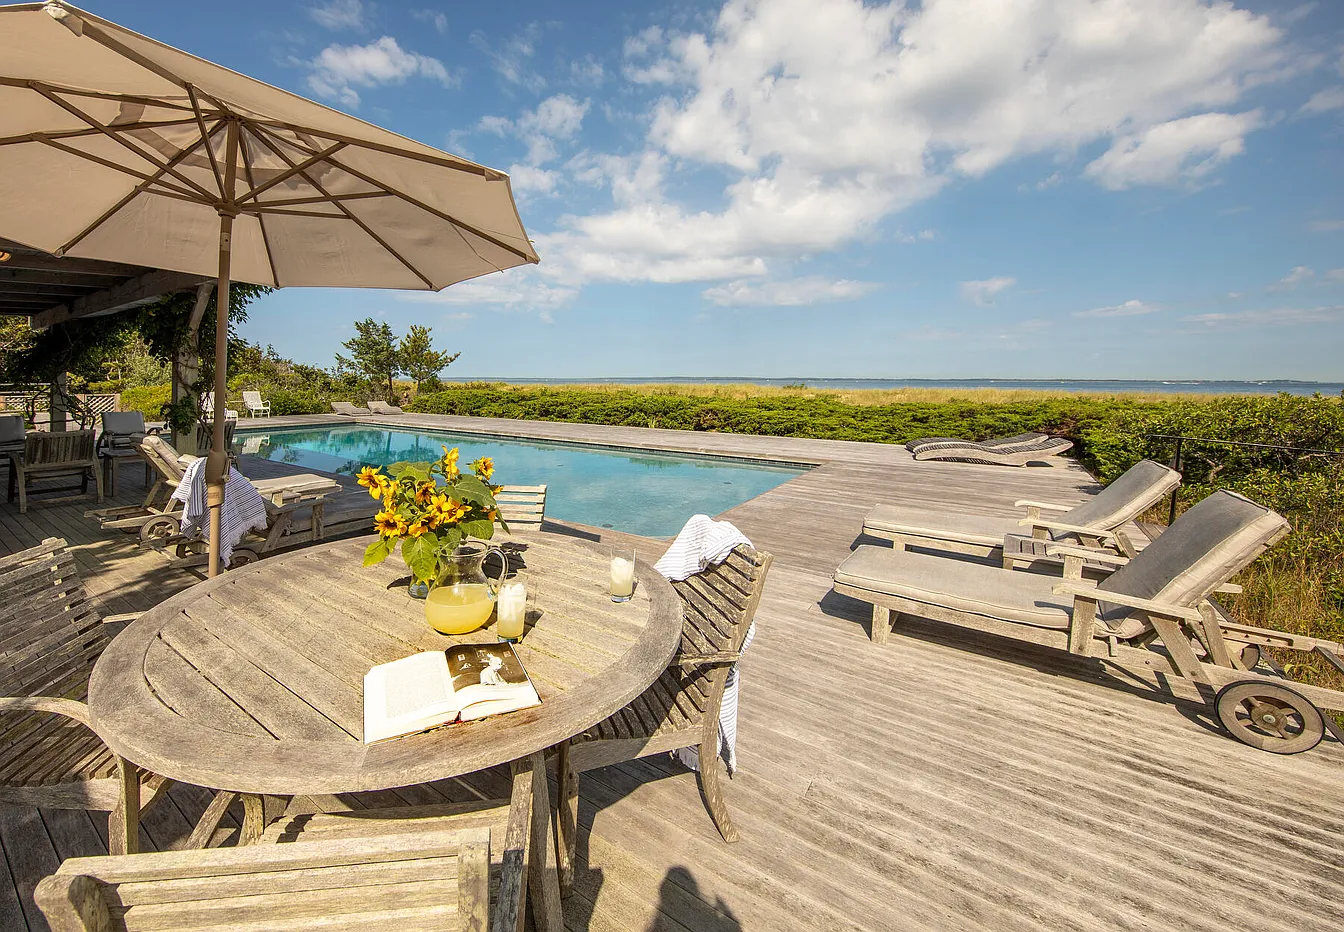 Pool area with wooden deck and furniture overlooking Vineyard sound.